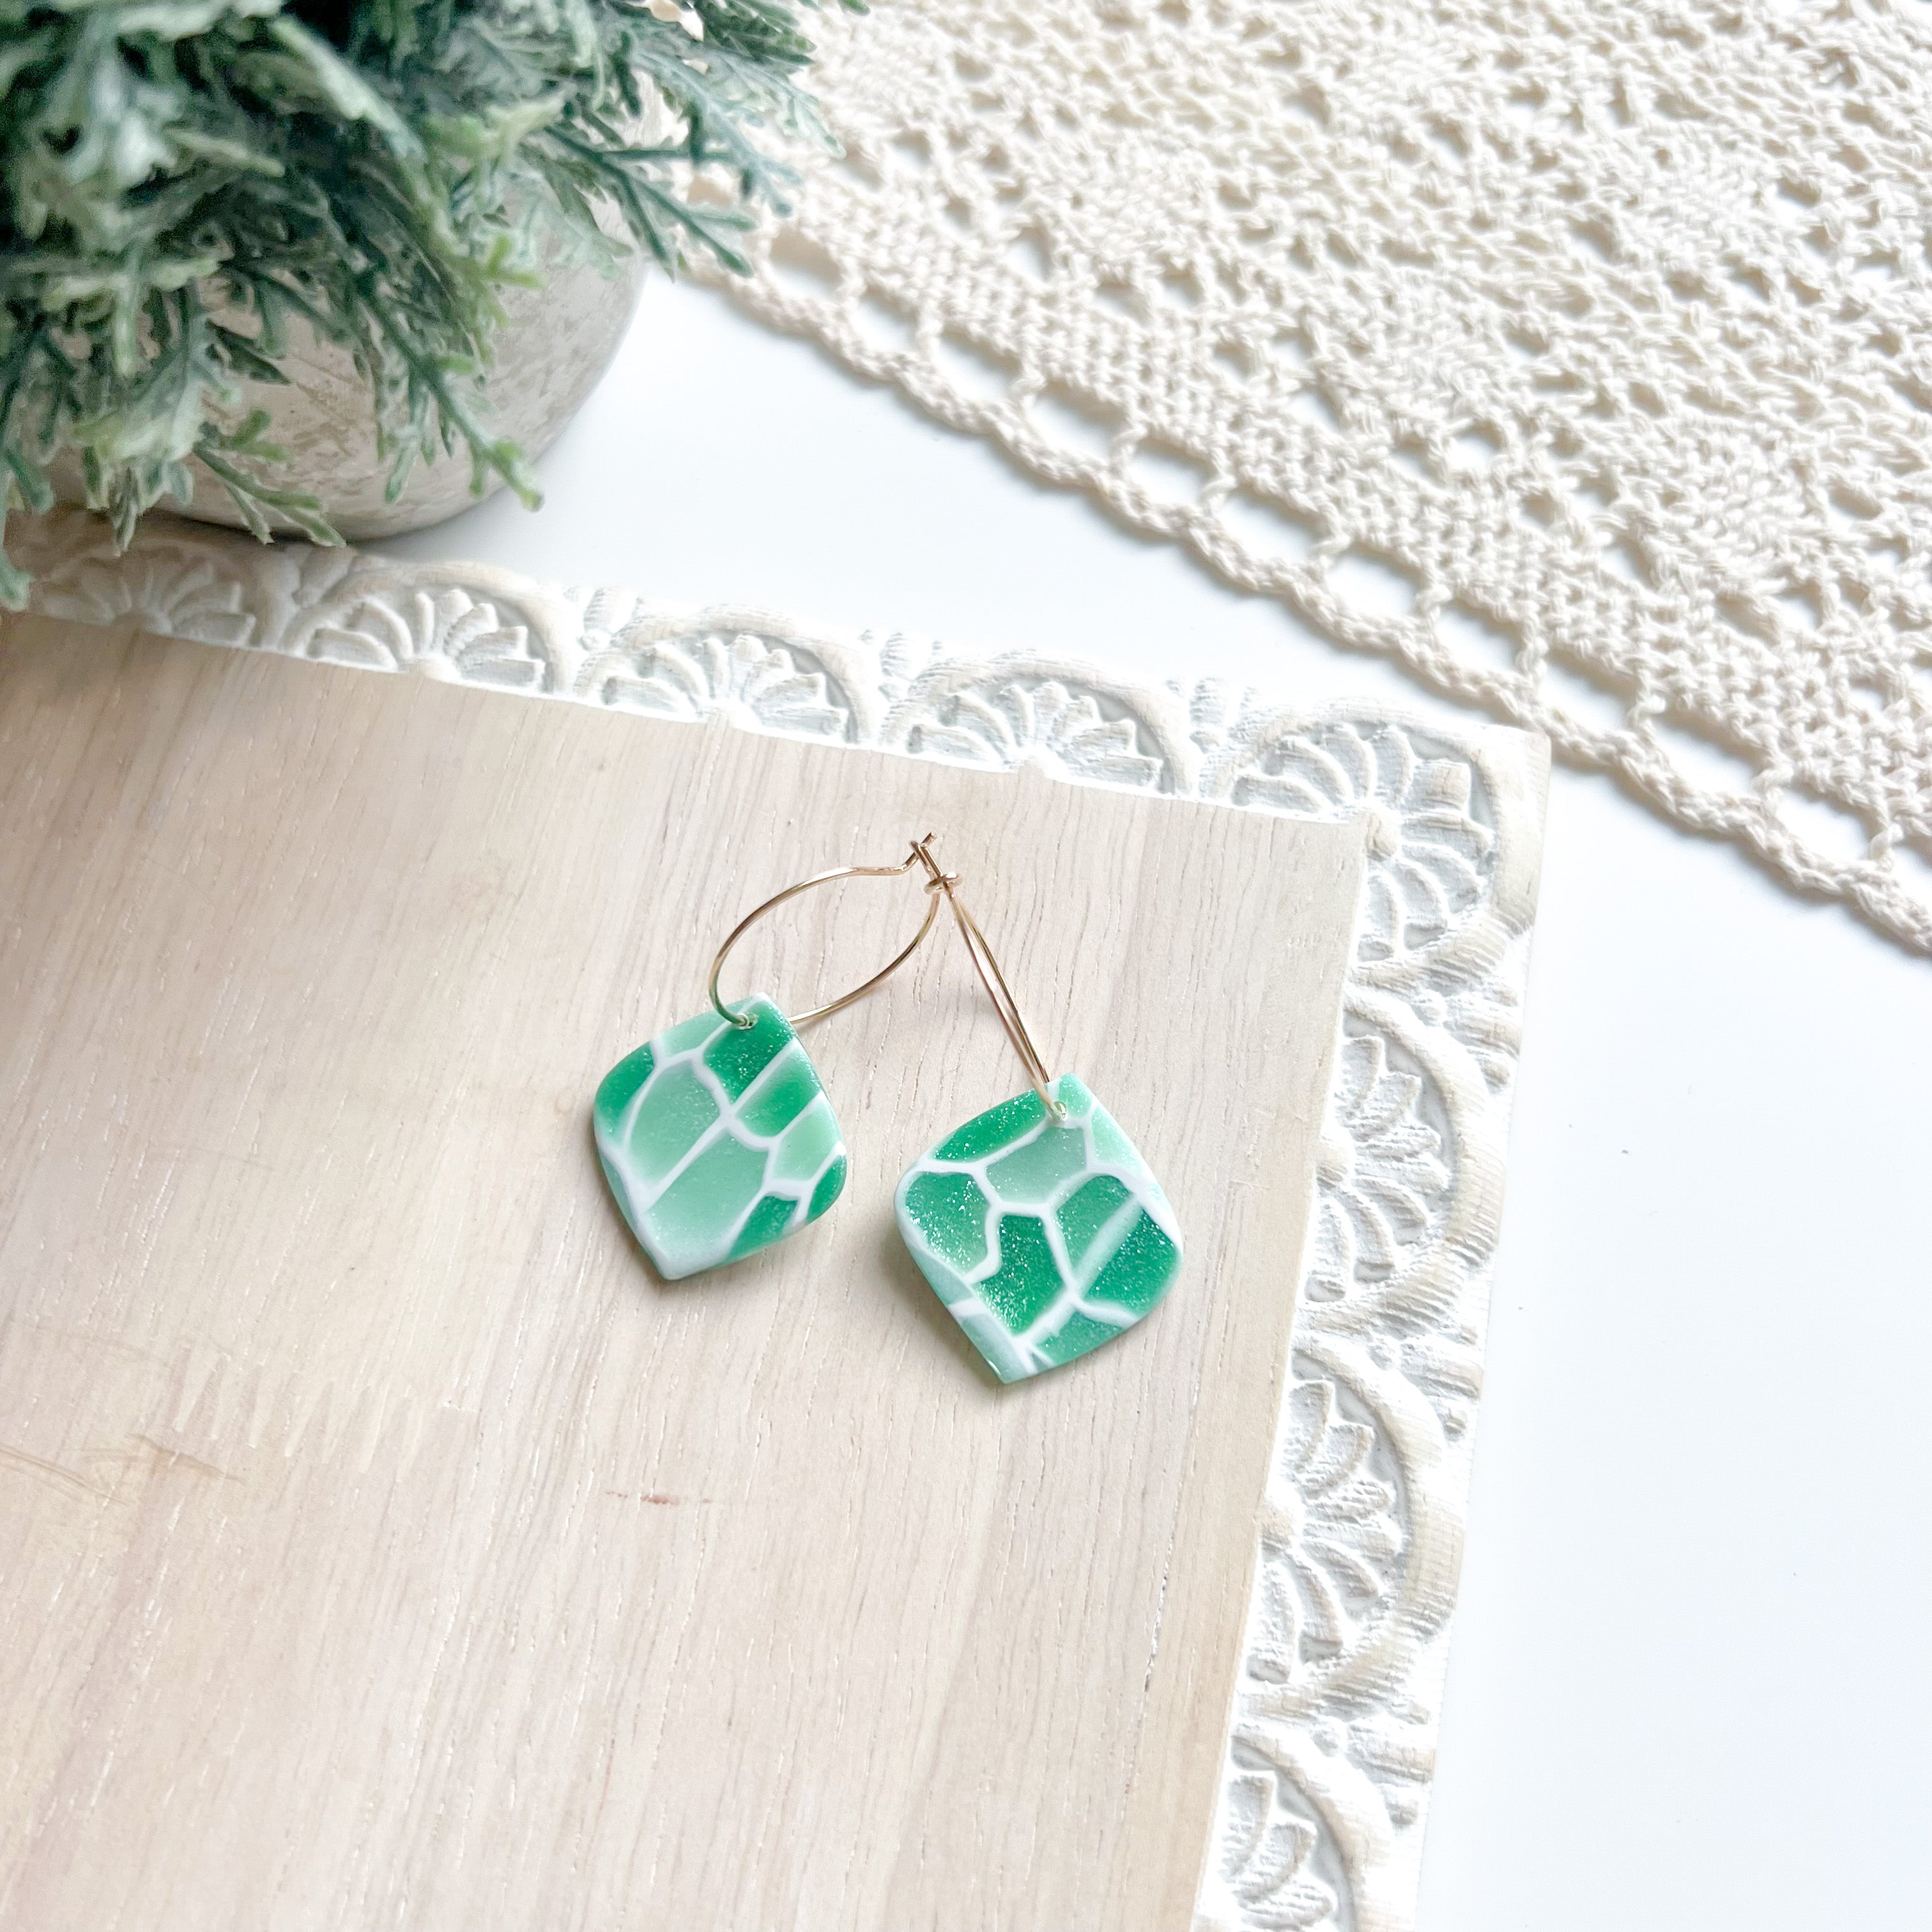 Stained Glass Clay Earrings